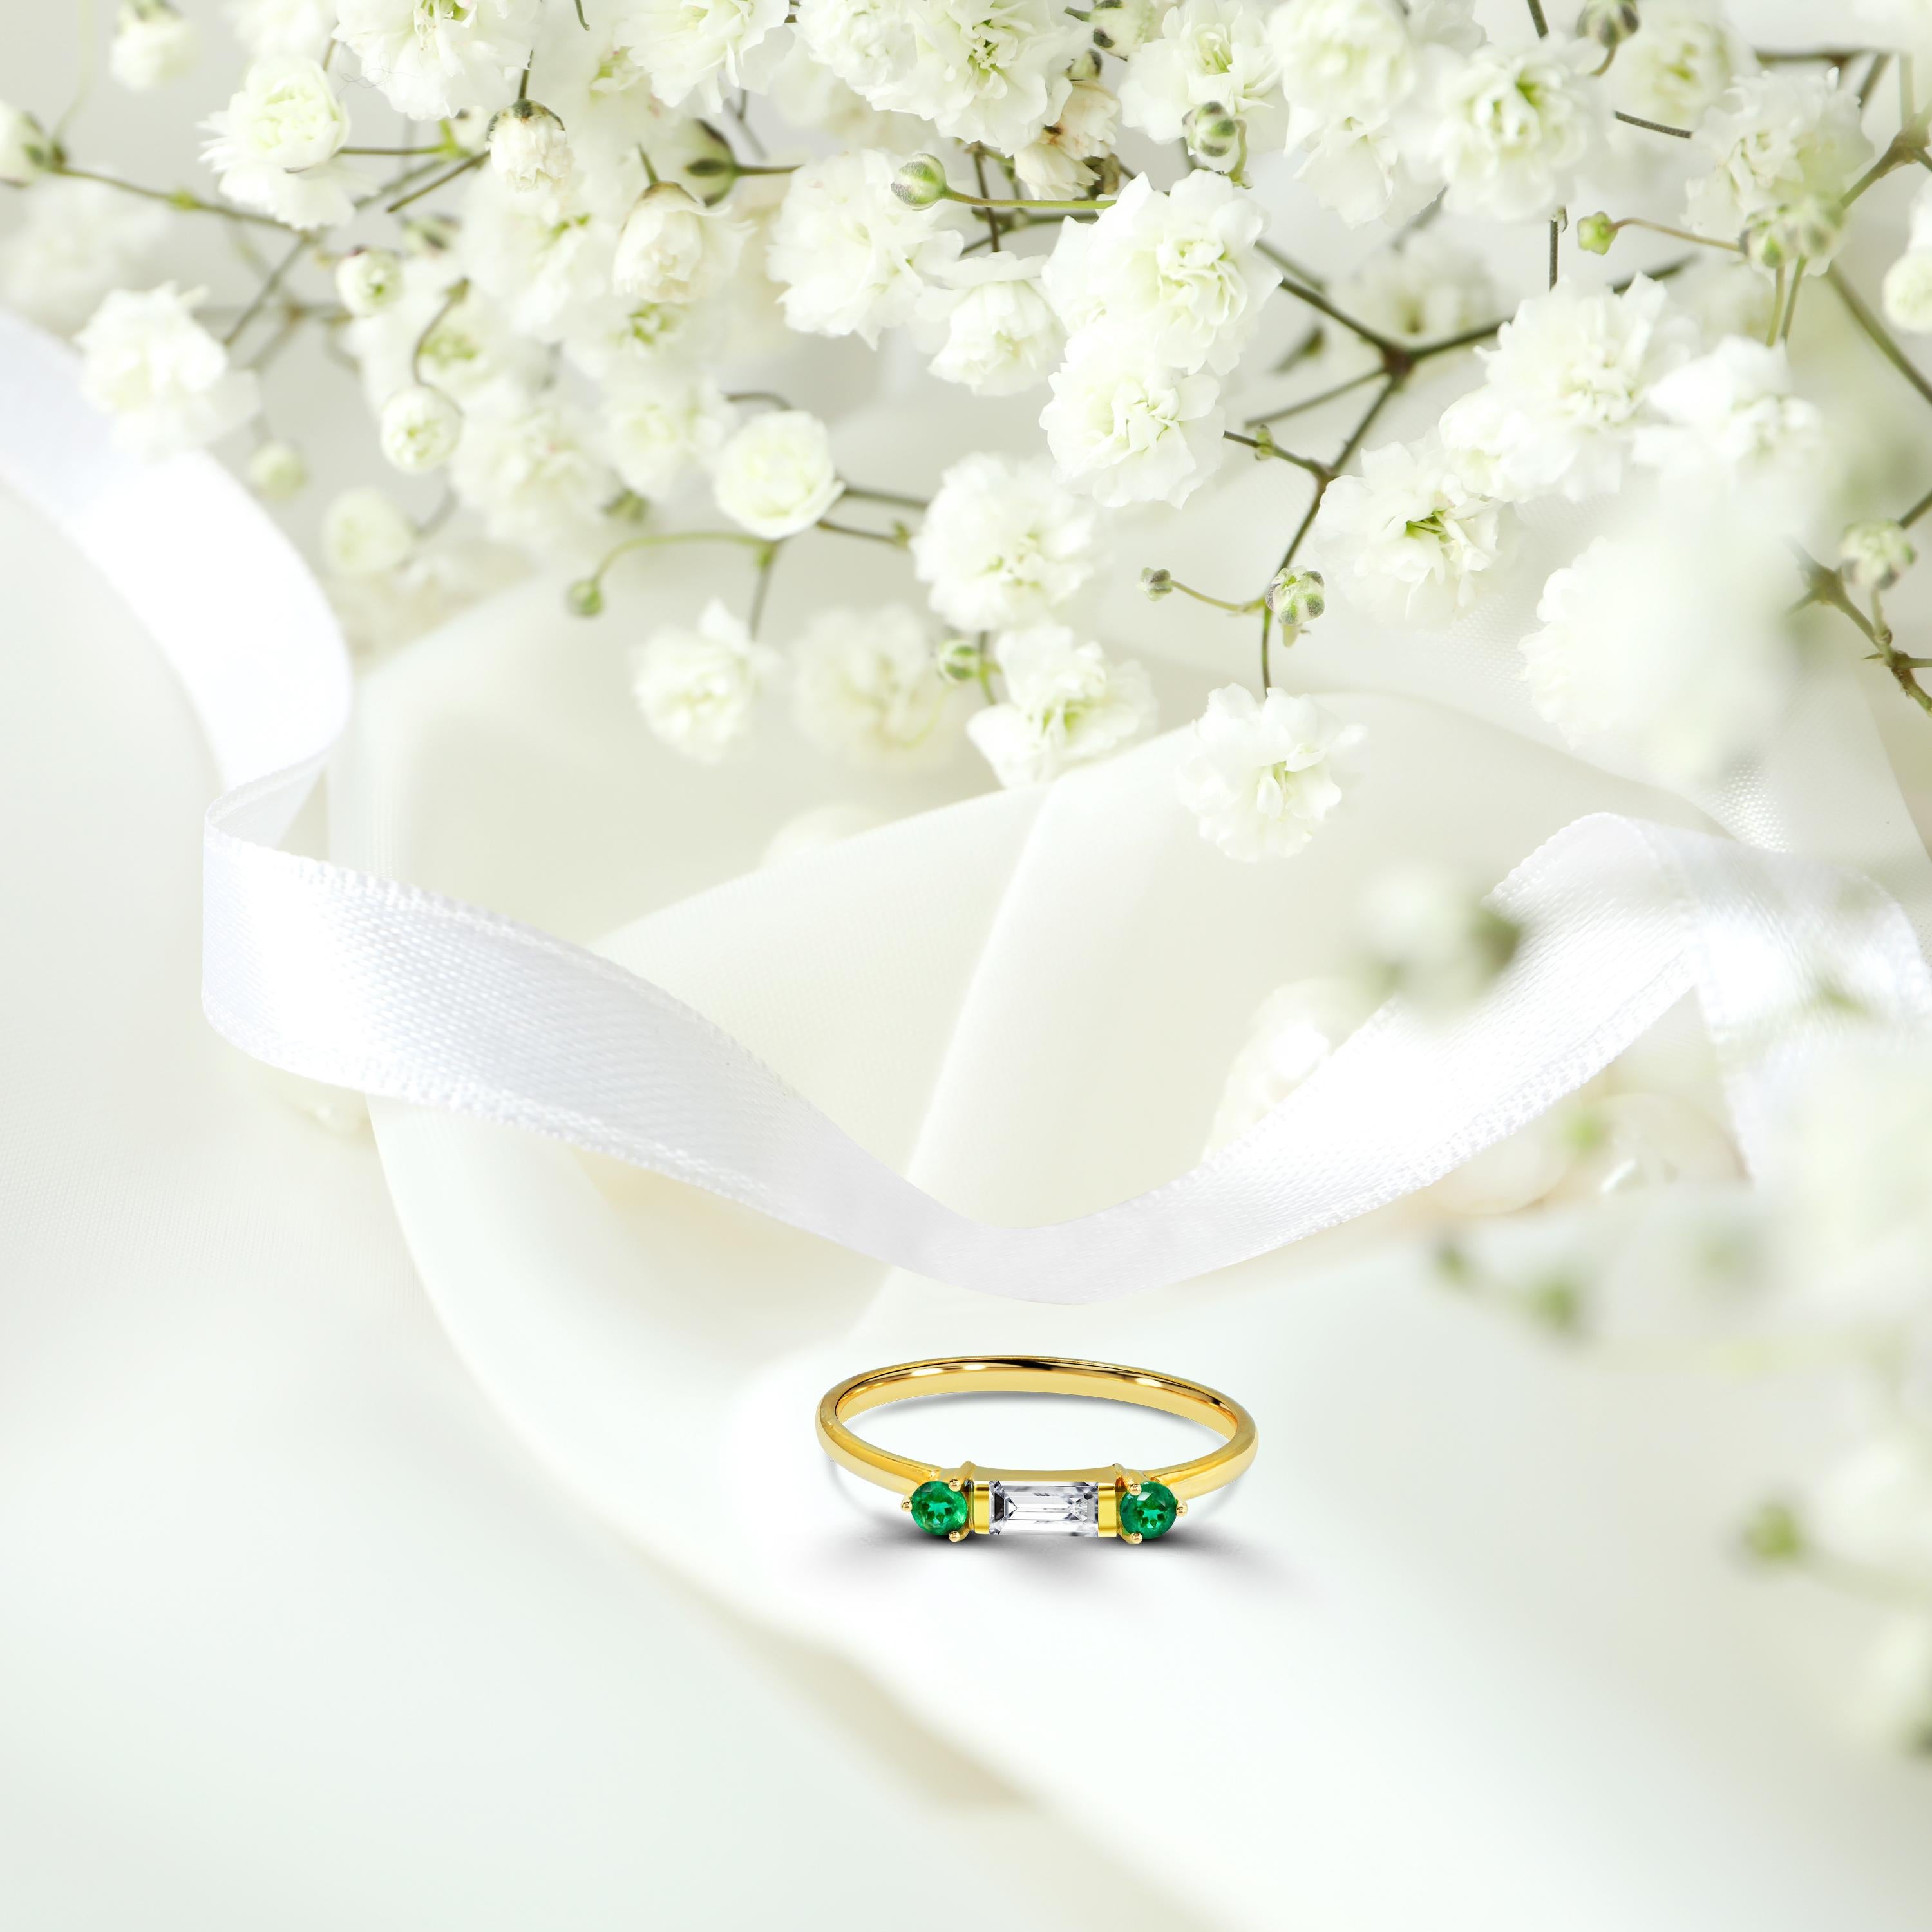 For Sale:  18k Gold Dainty Baguette Diamond Ring with Emerald Minimal Ring 7